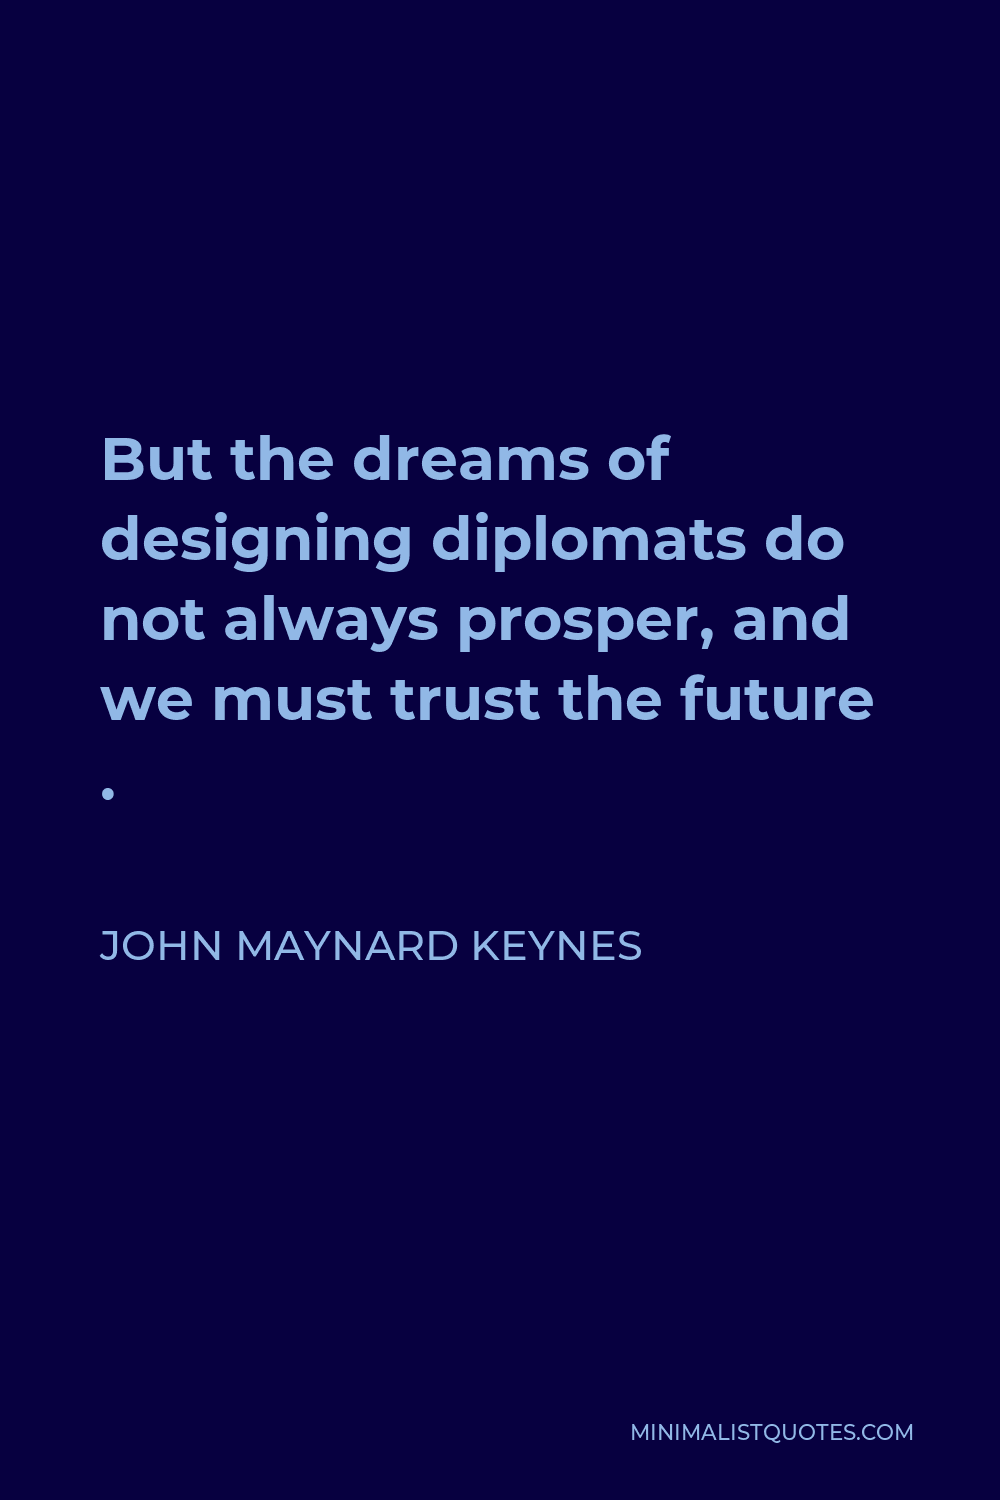 John Maynard Keynes Quote - But the dreams of designing diplomats do not always prosper, and we must trust the future .